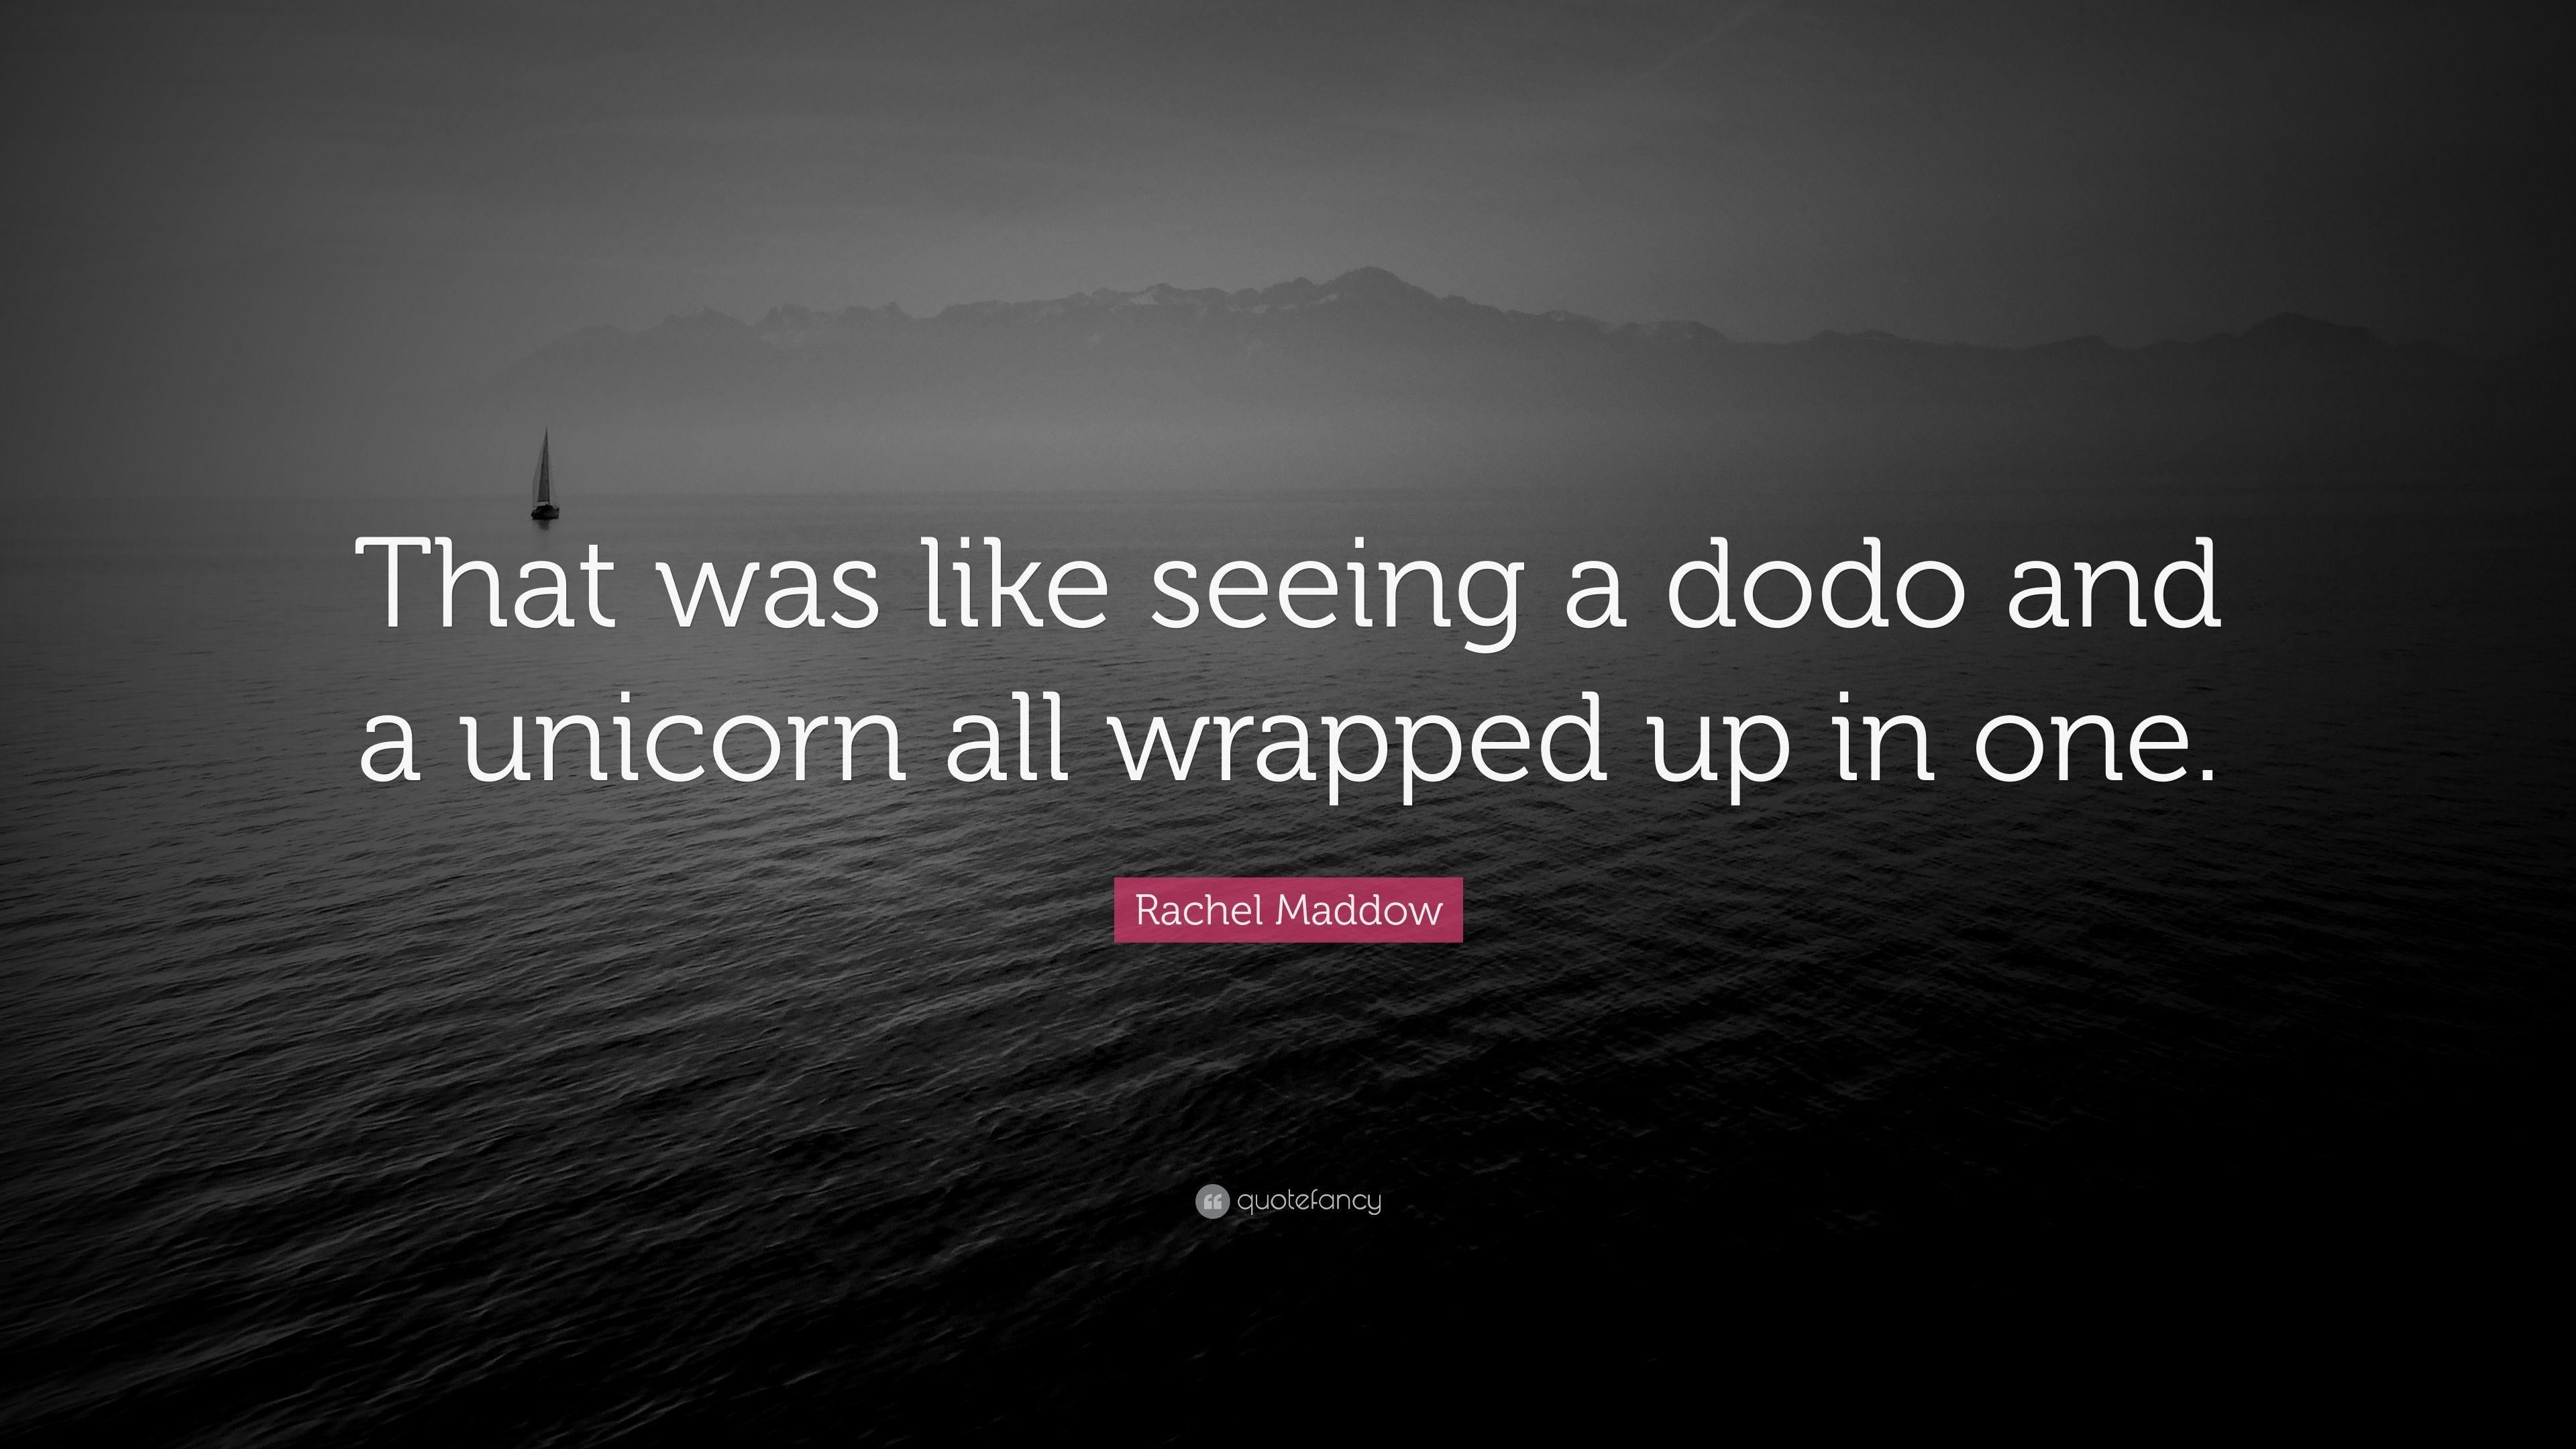 Rachel Maddow Quote: “That was like seeing a dodo and a unicorn all